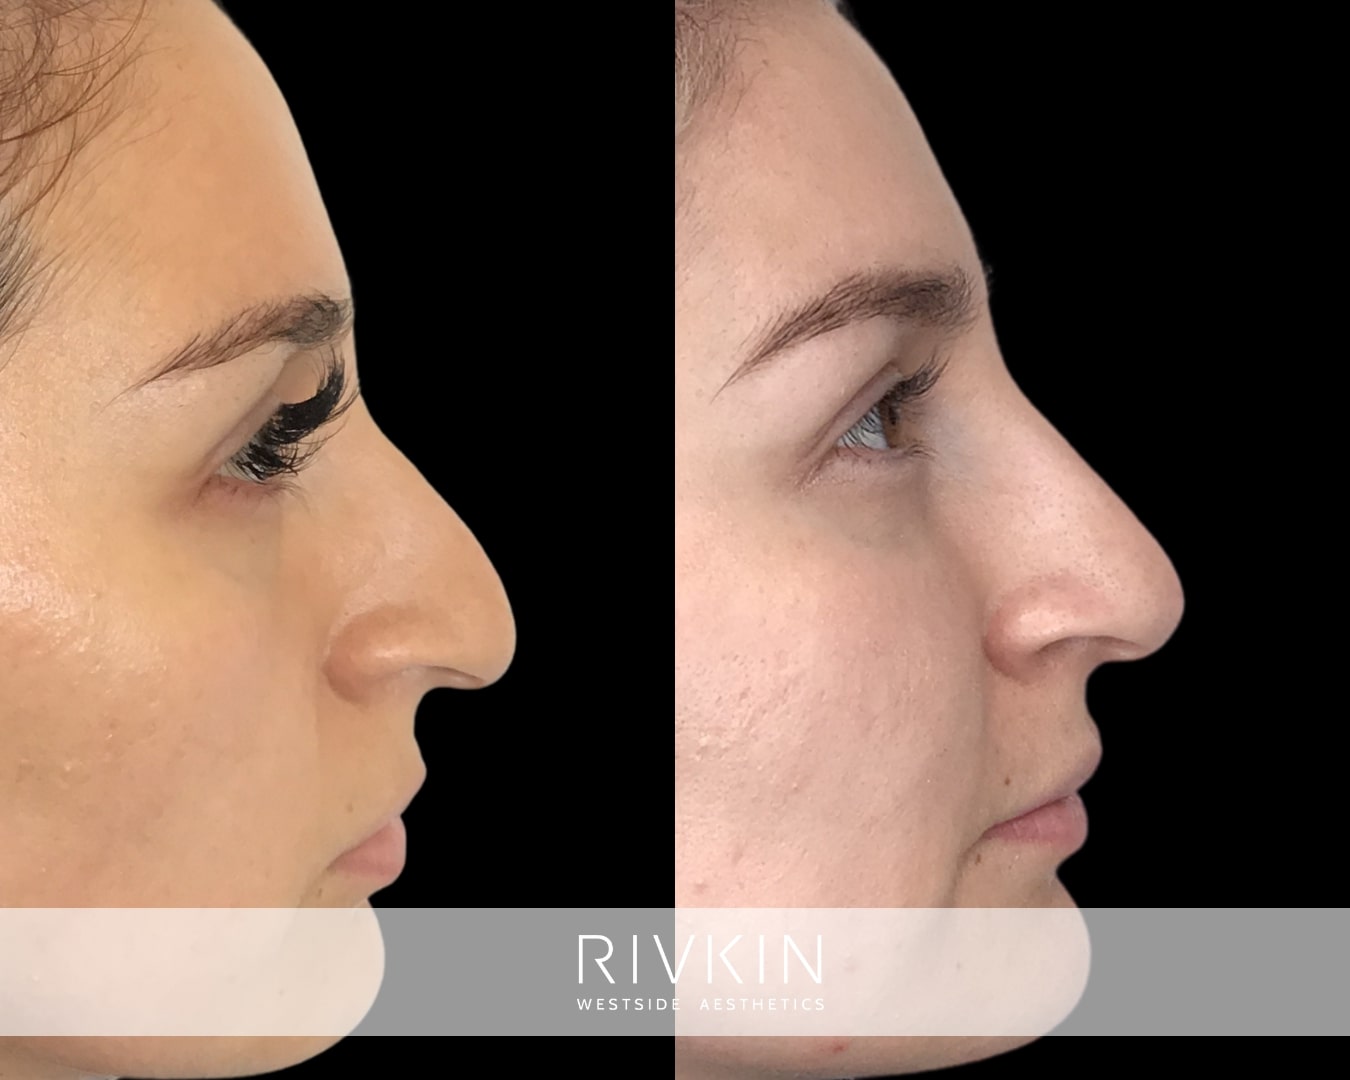 This patient's droopy nasal tip used to accentuate the curvature of their nose, making it appear hooked. Correcting the droopy nasal tip has helped reduce the beaky appearance and improved facial harmony.